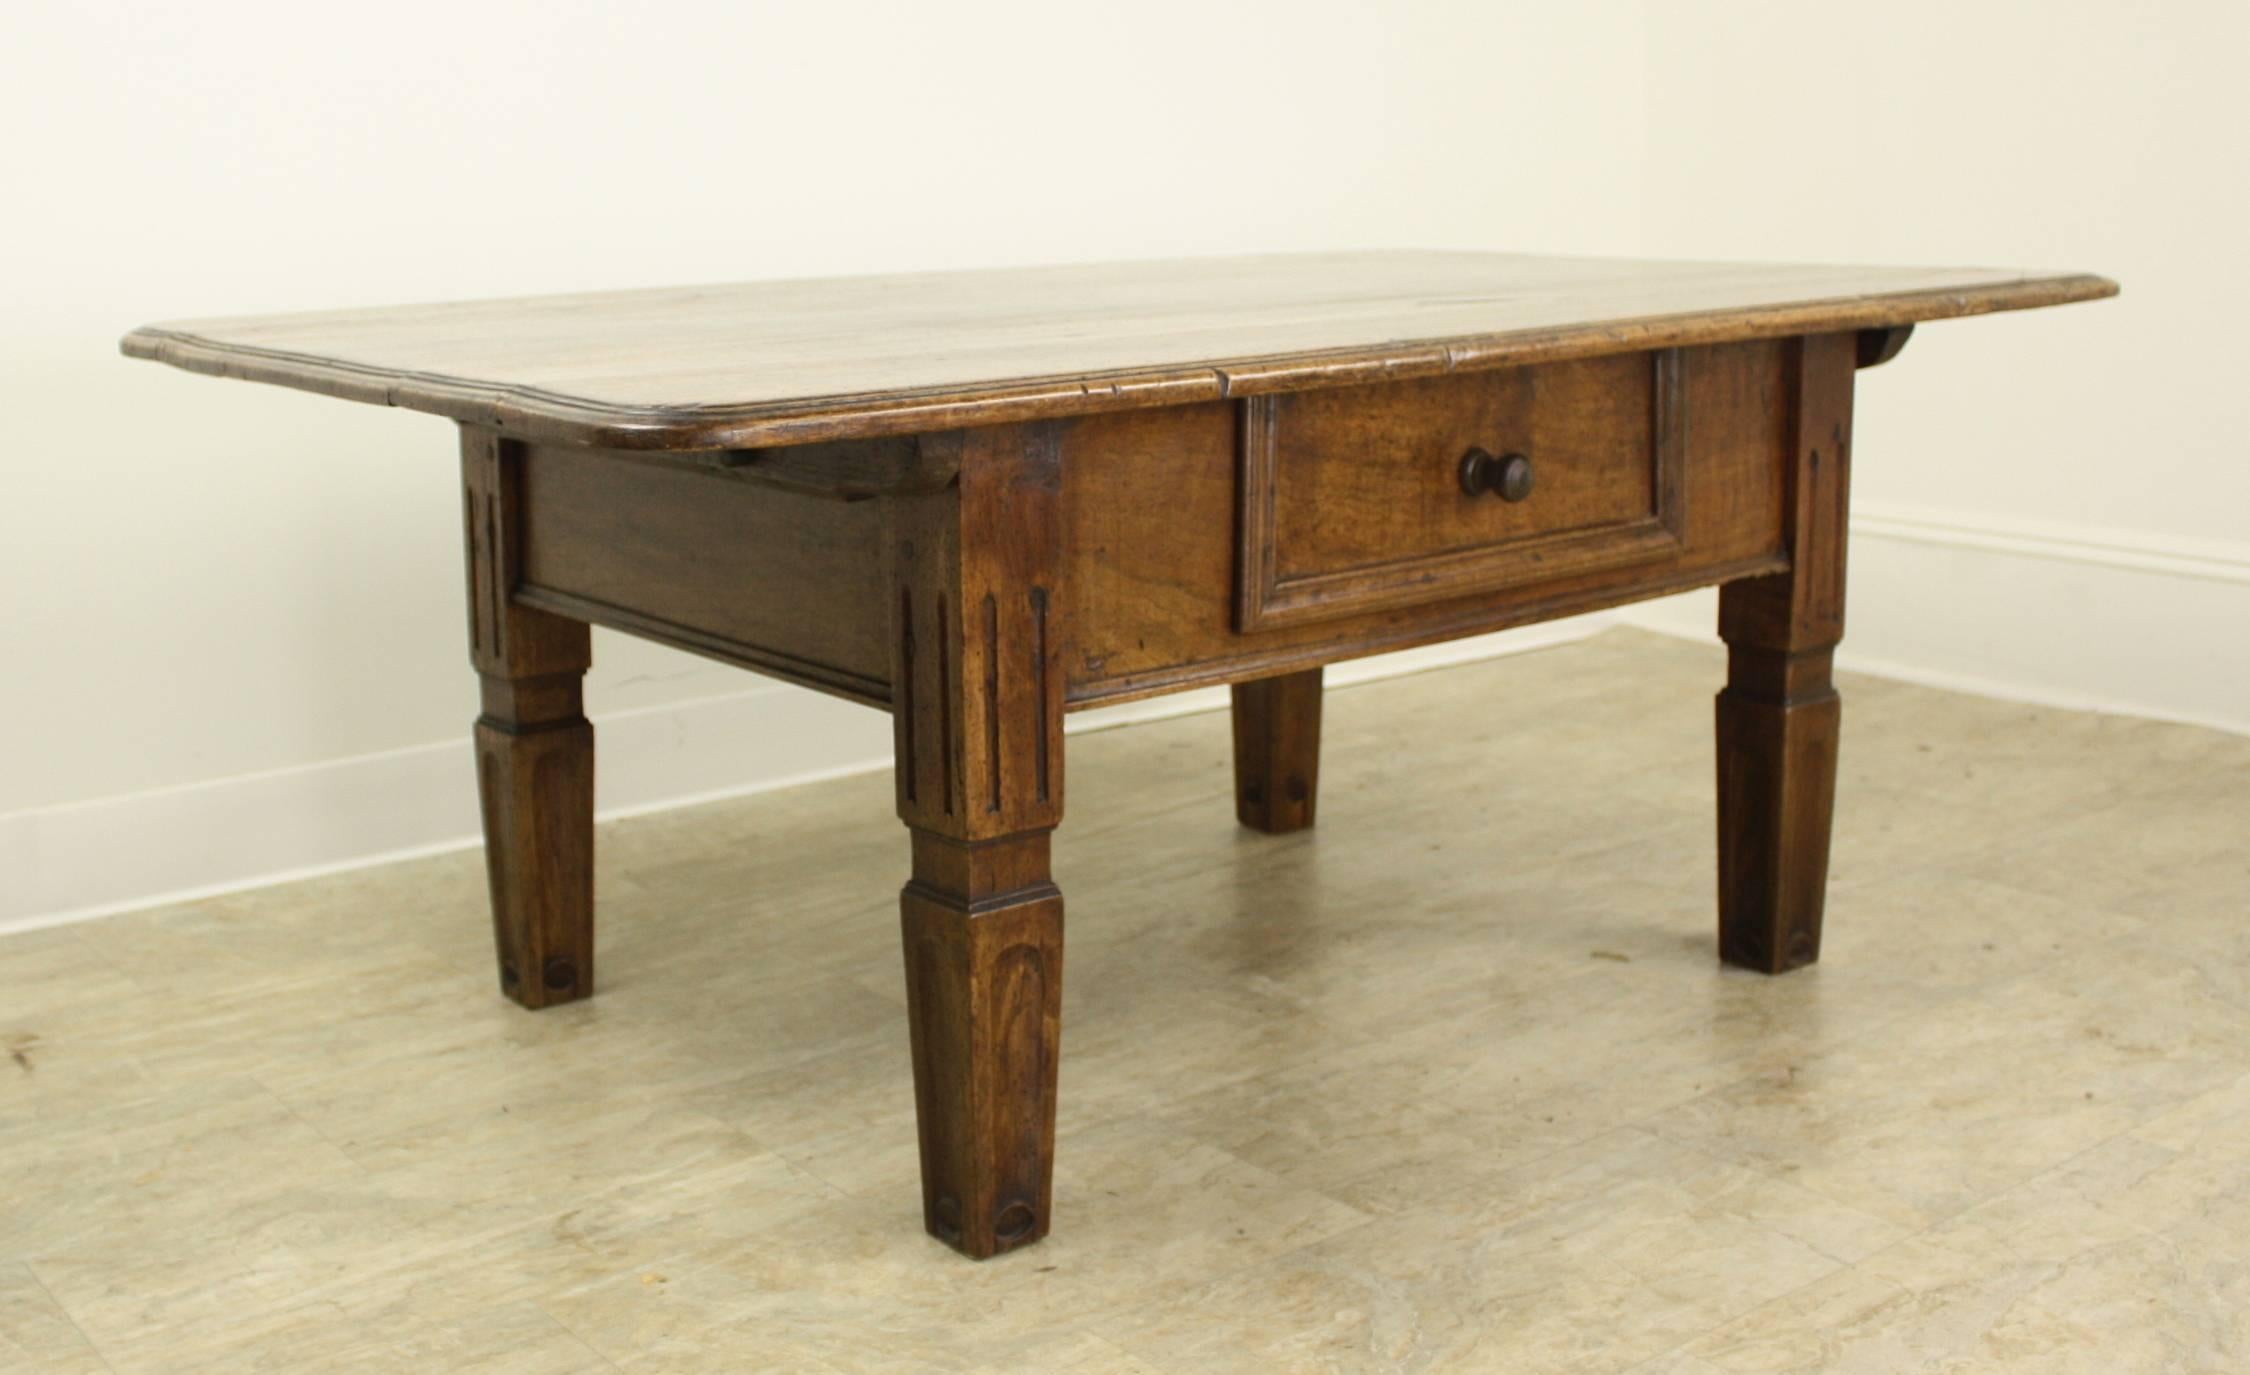 A beautifully grained Alsacian walnut coffee table. The top has wonderful color and patina with extravagant grain, while the look of the front is punctuated by a single carved drawer. Chunky stylized legs complete the look.